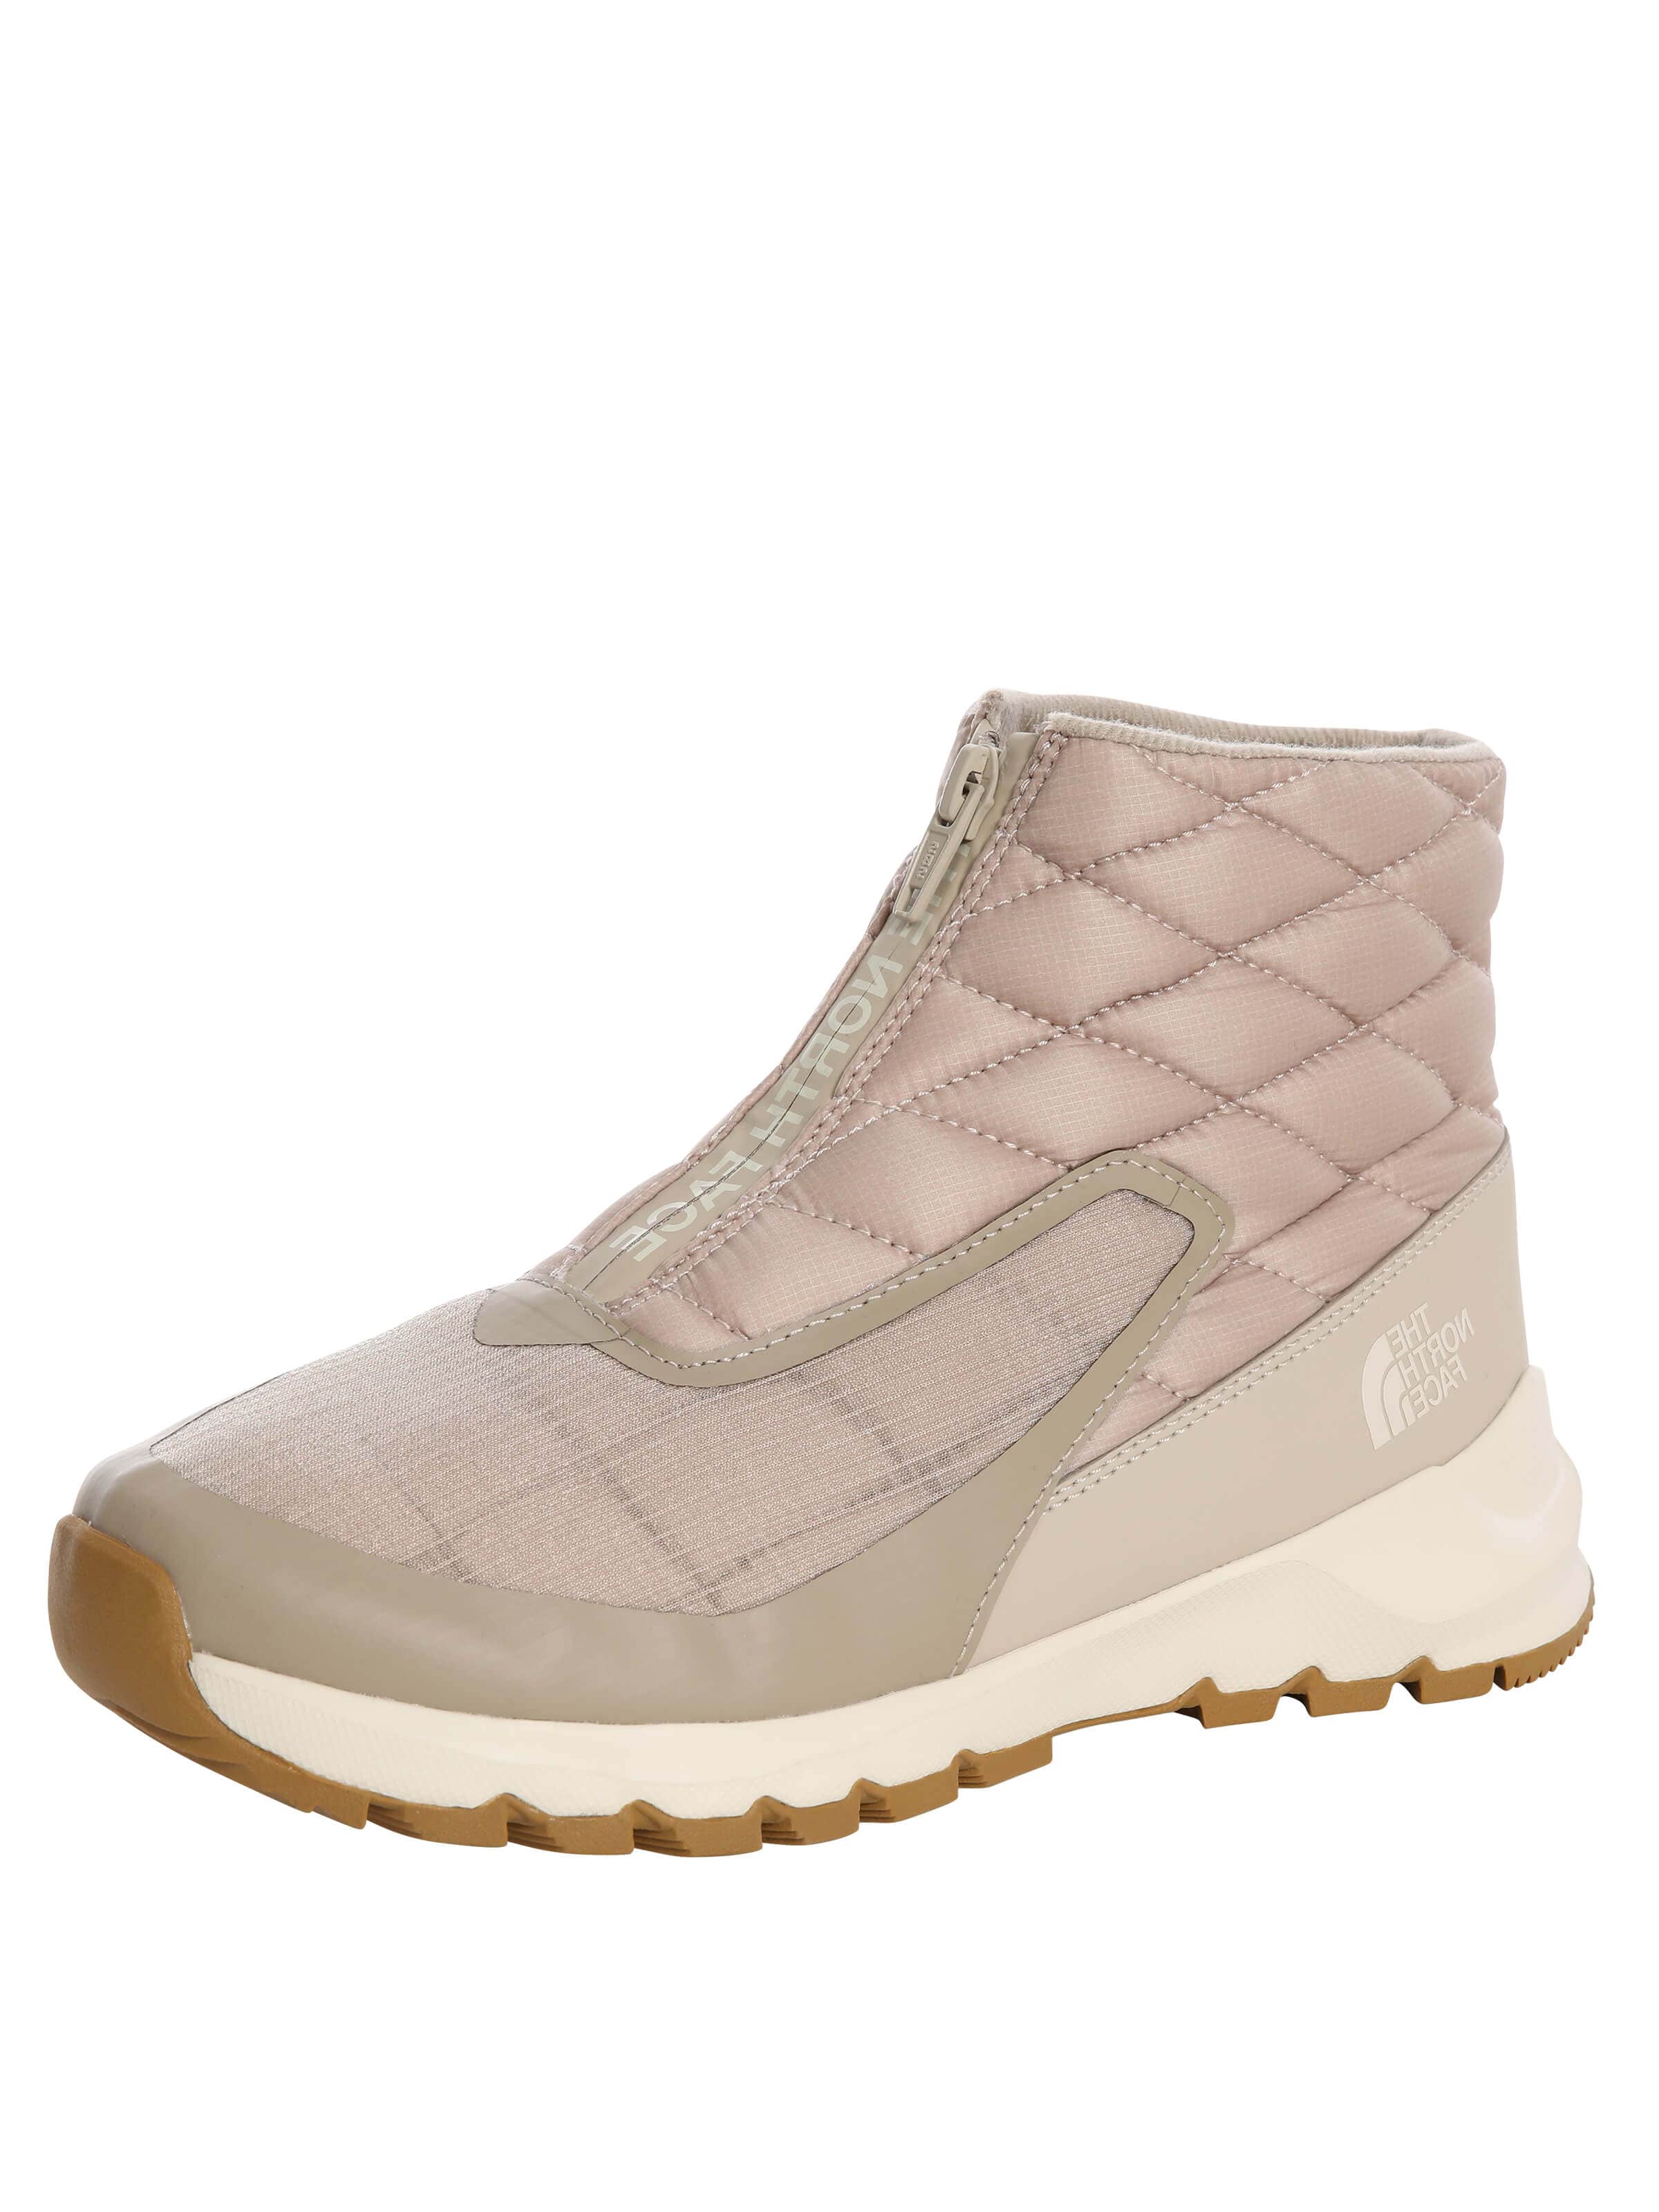 THE NORTH FACE Boots THERMOBALL PROGRESSIVE in Beige, Crema 